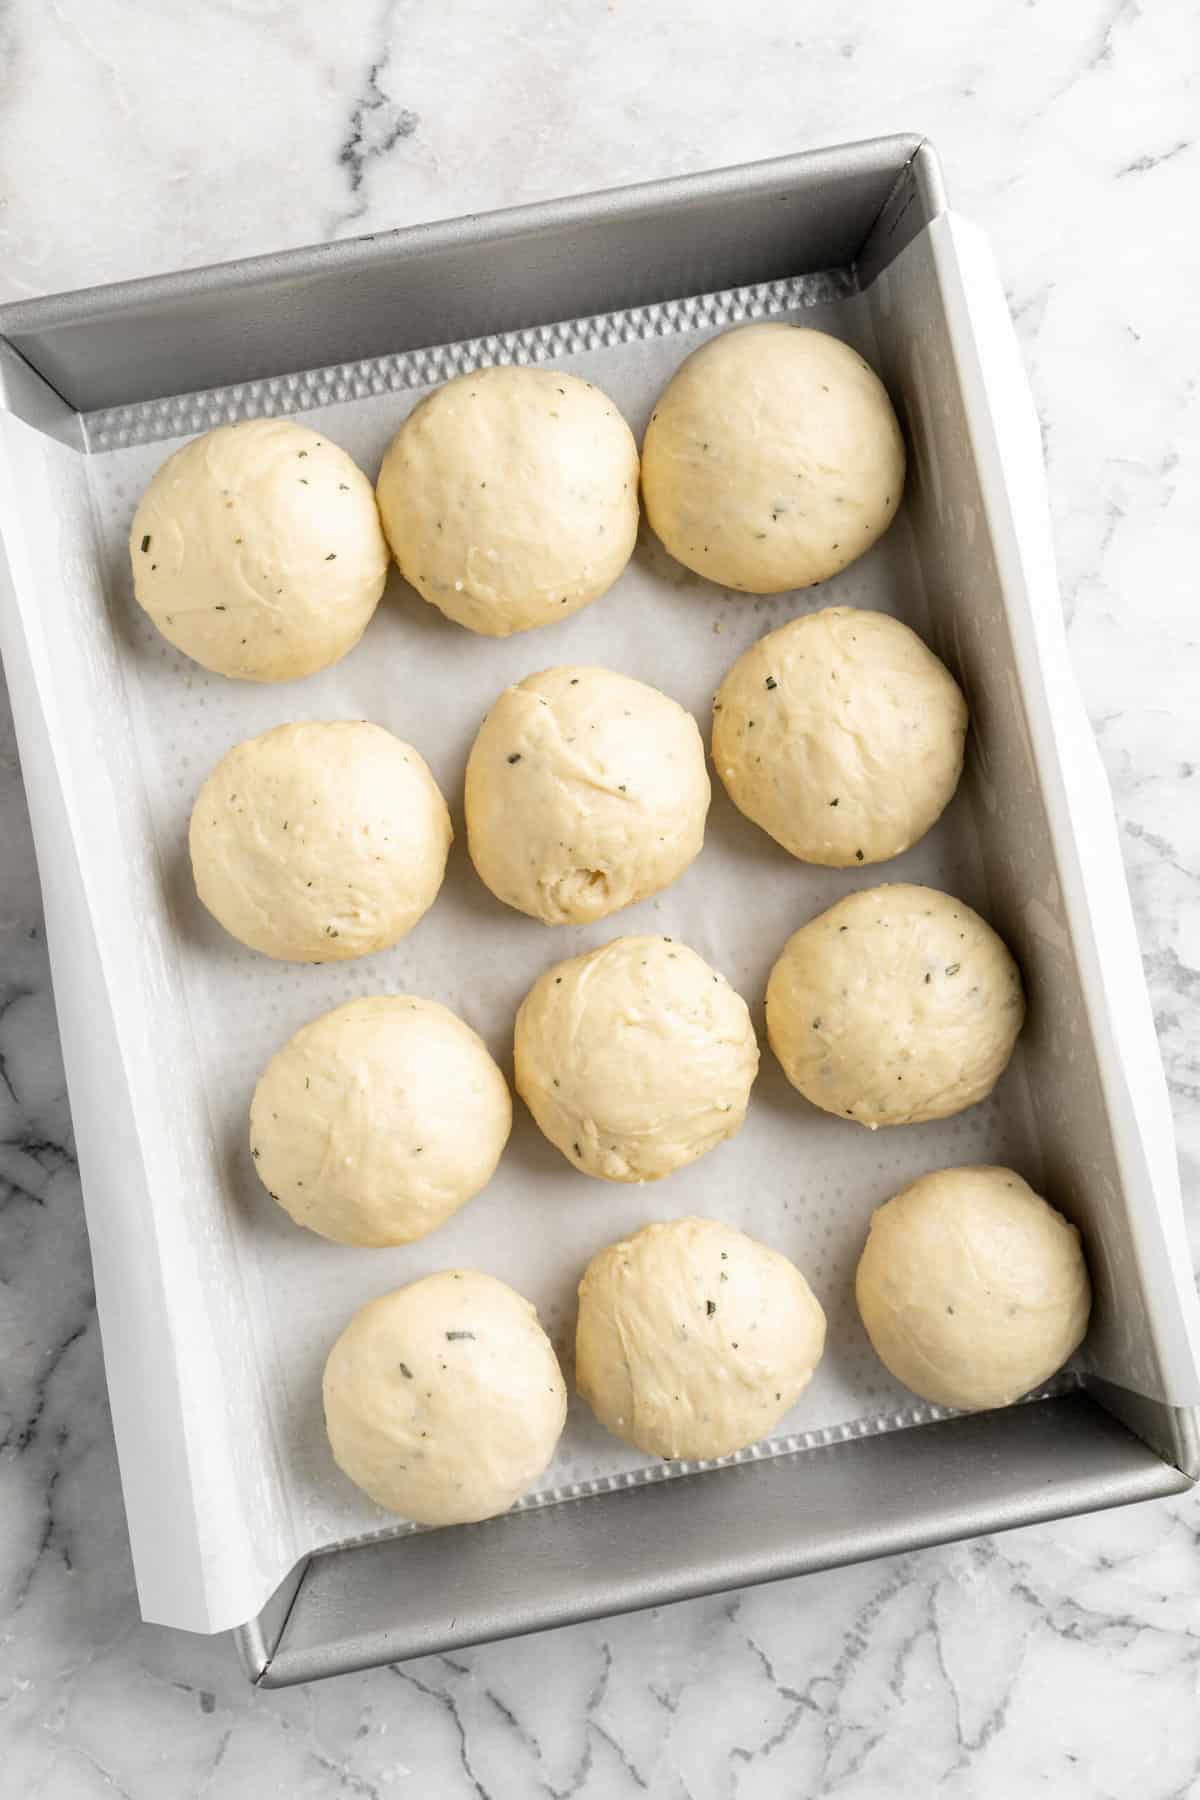 Rosemary white cheddar rolls proofing in a rectangle baking pan.